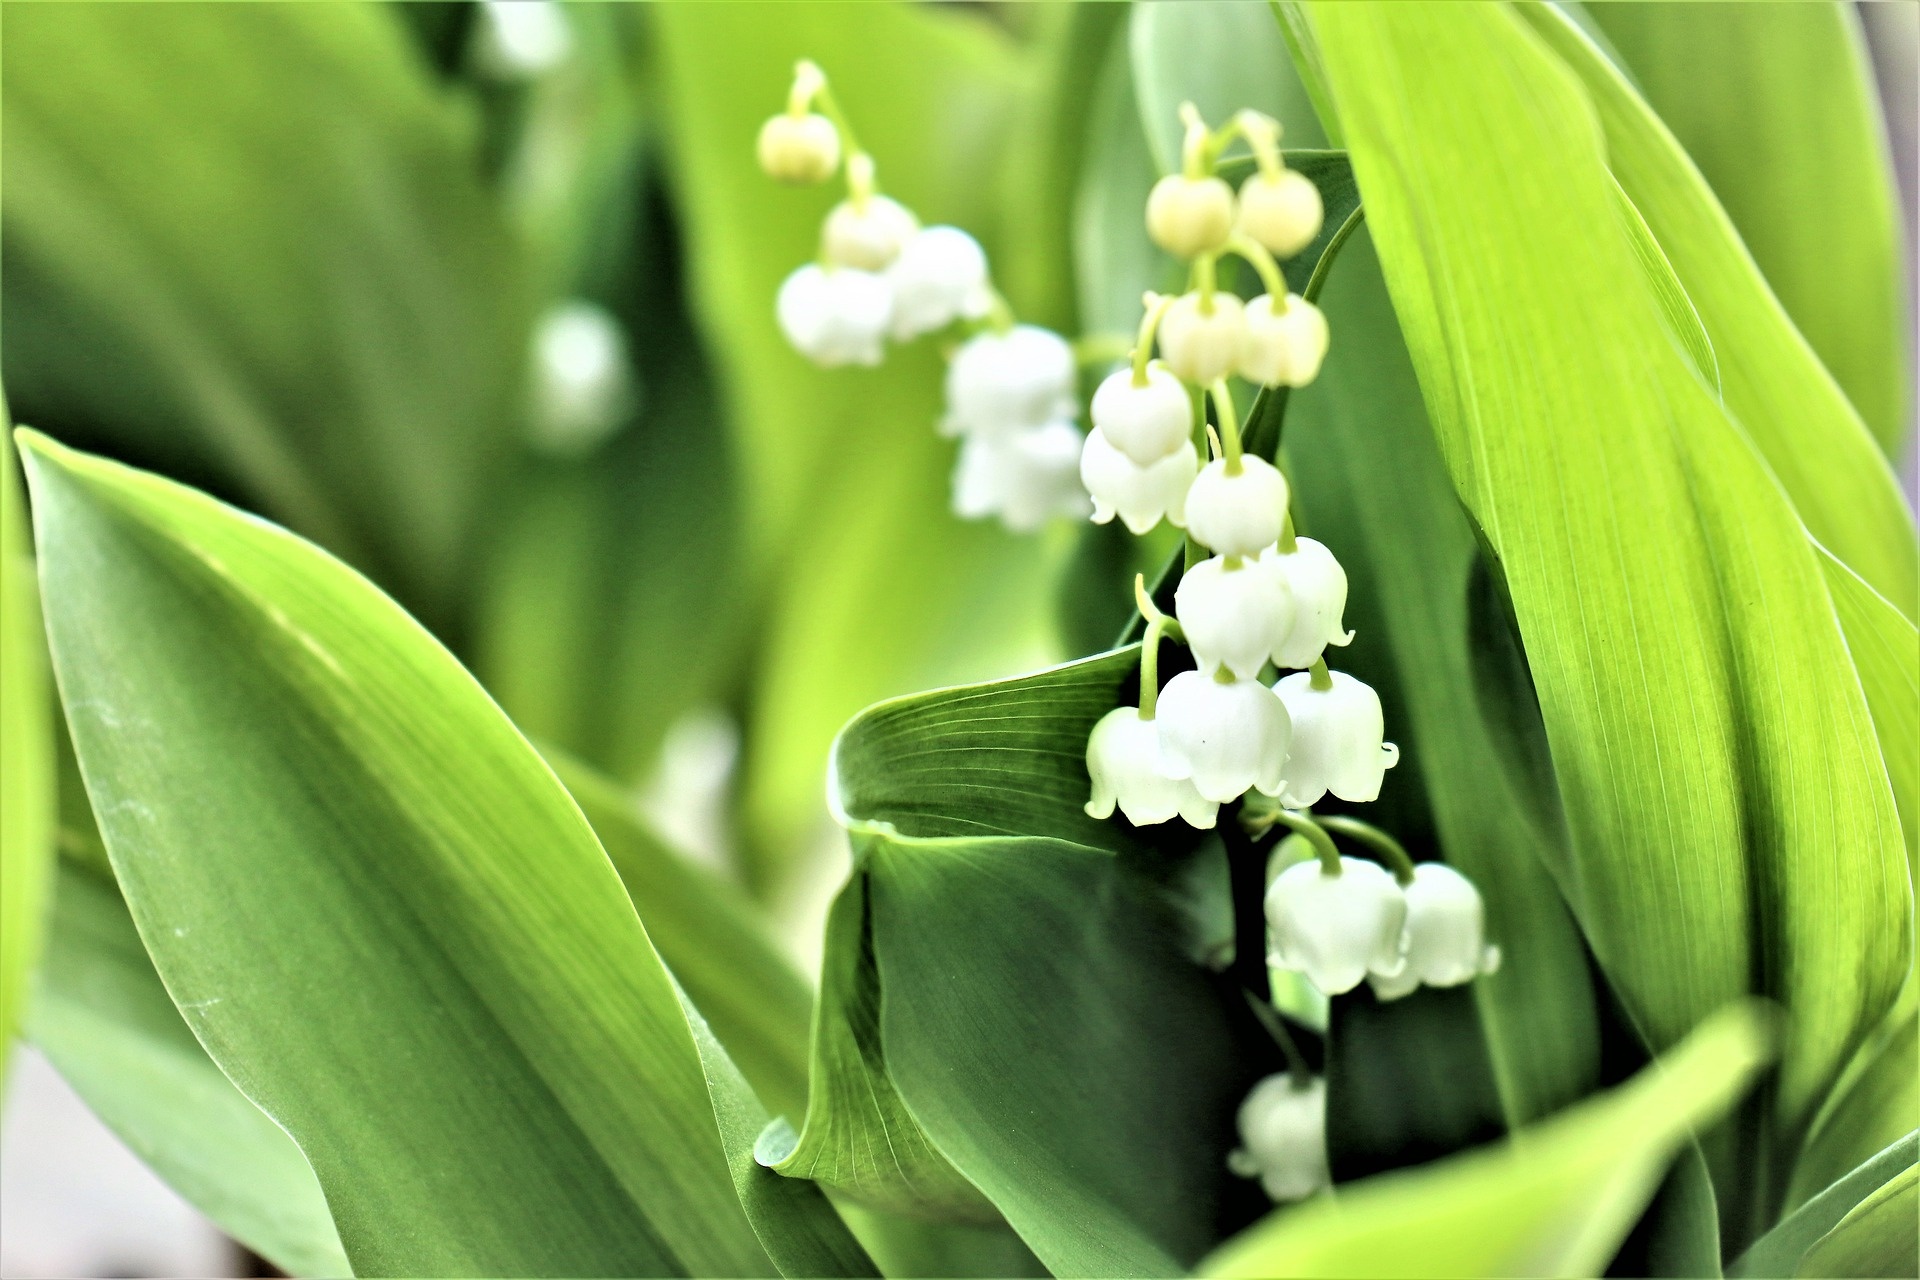 Lily-of-the-valley has a distinctive fragrance, often used in perfumery